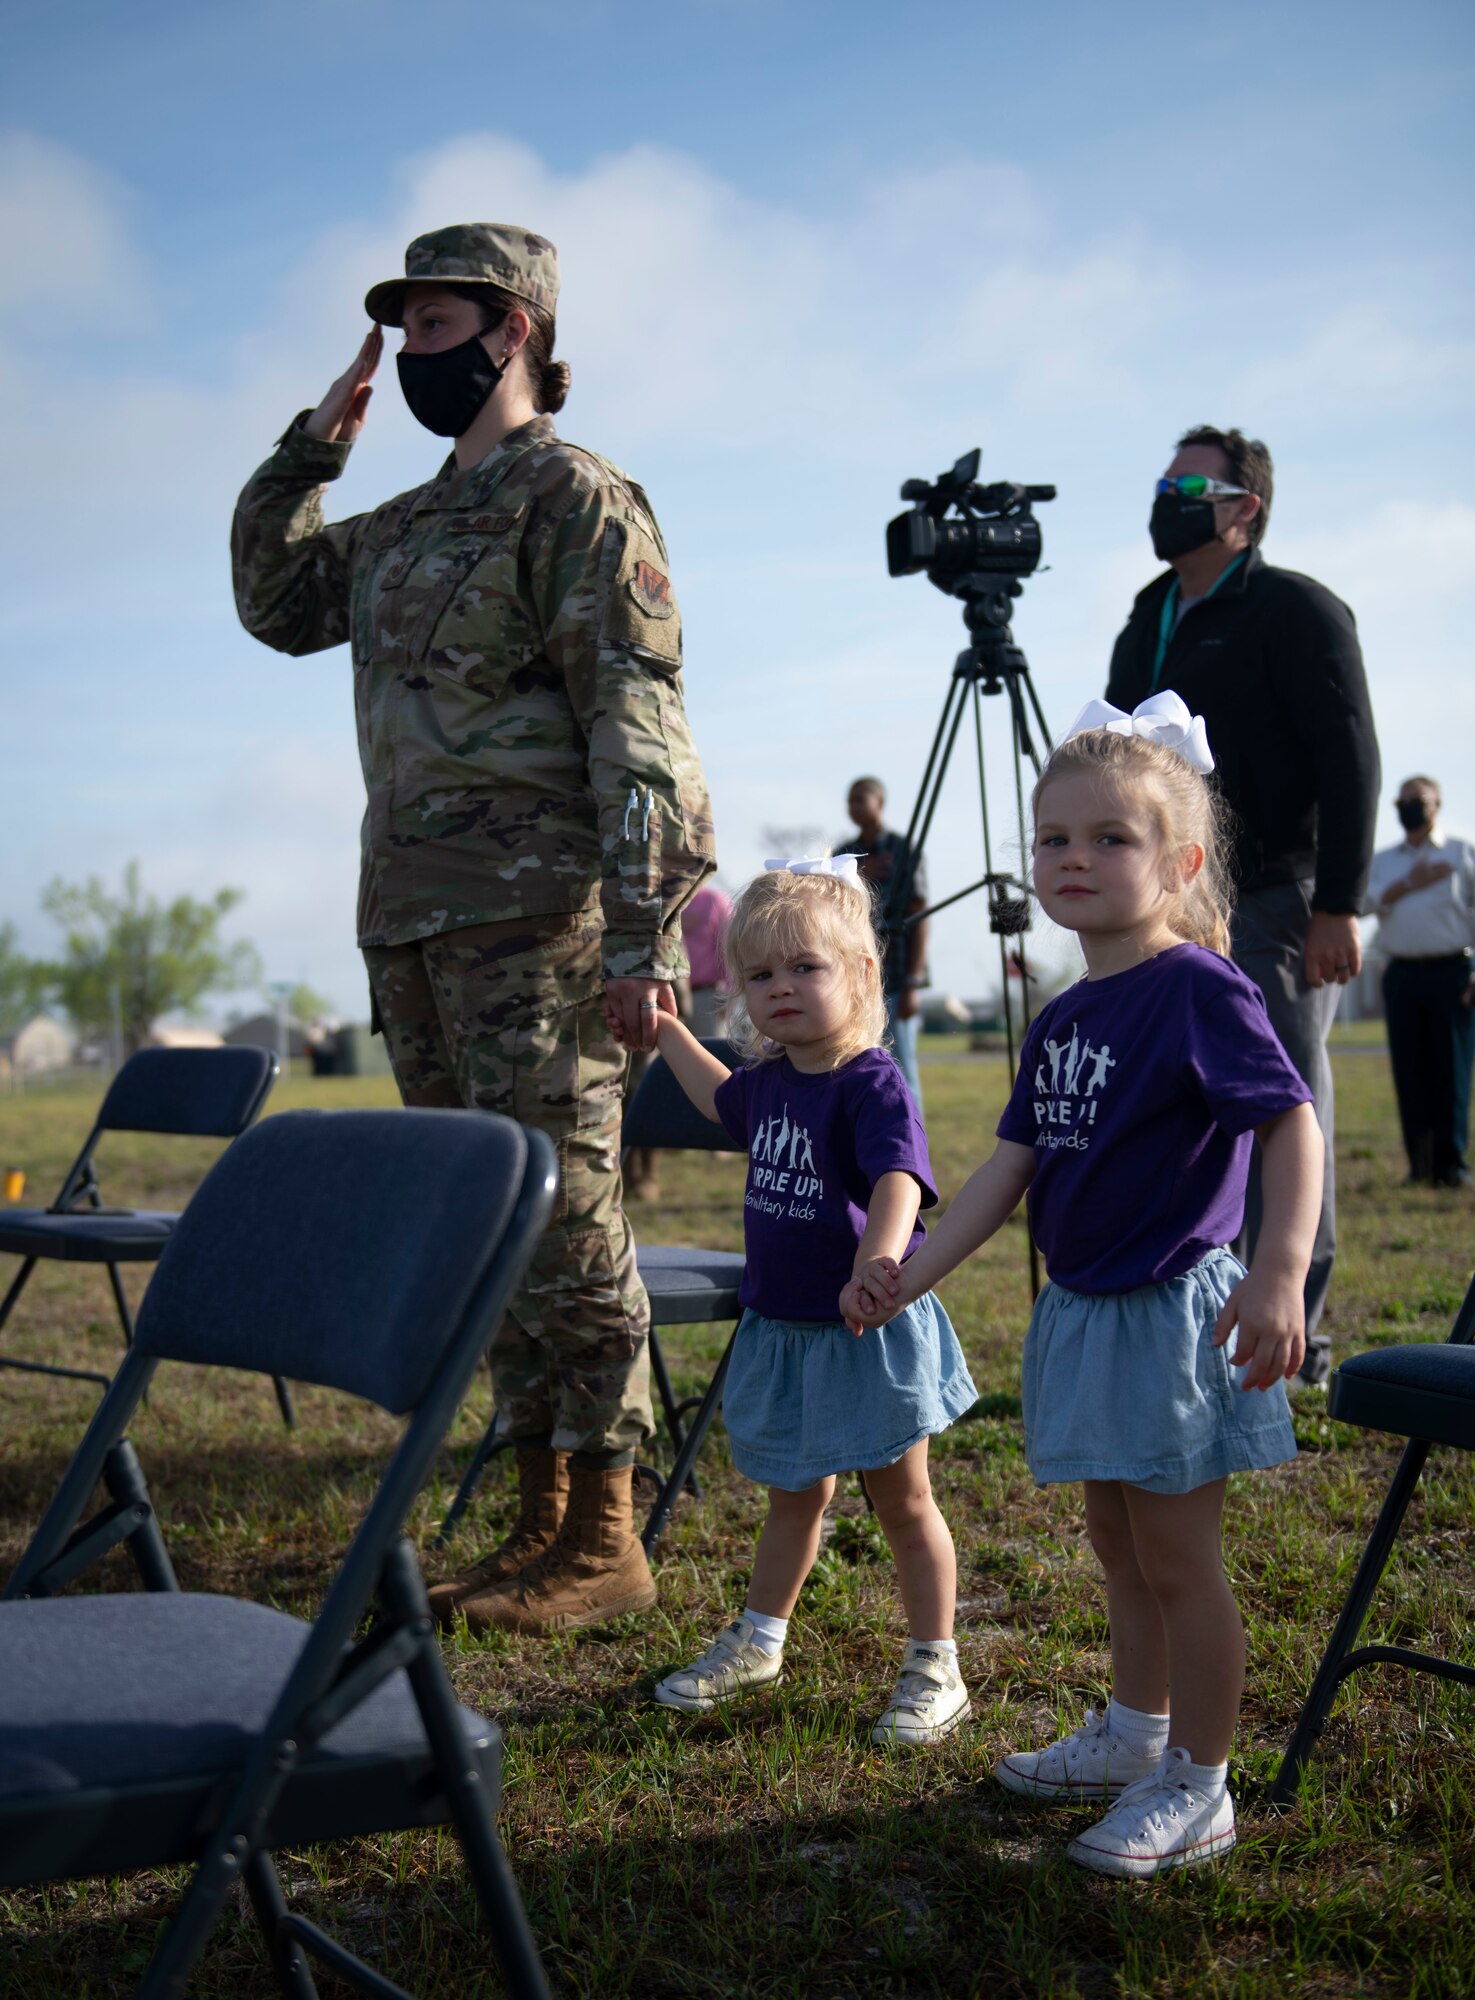 An Airman and her childrean stand together